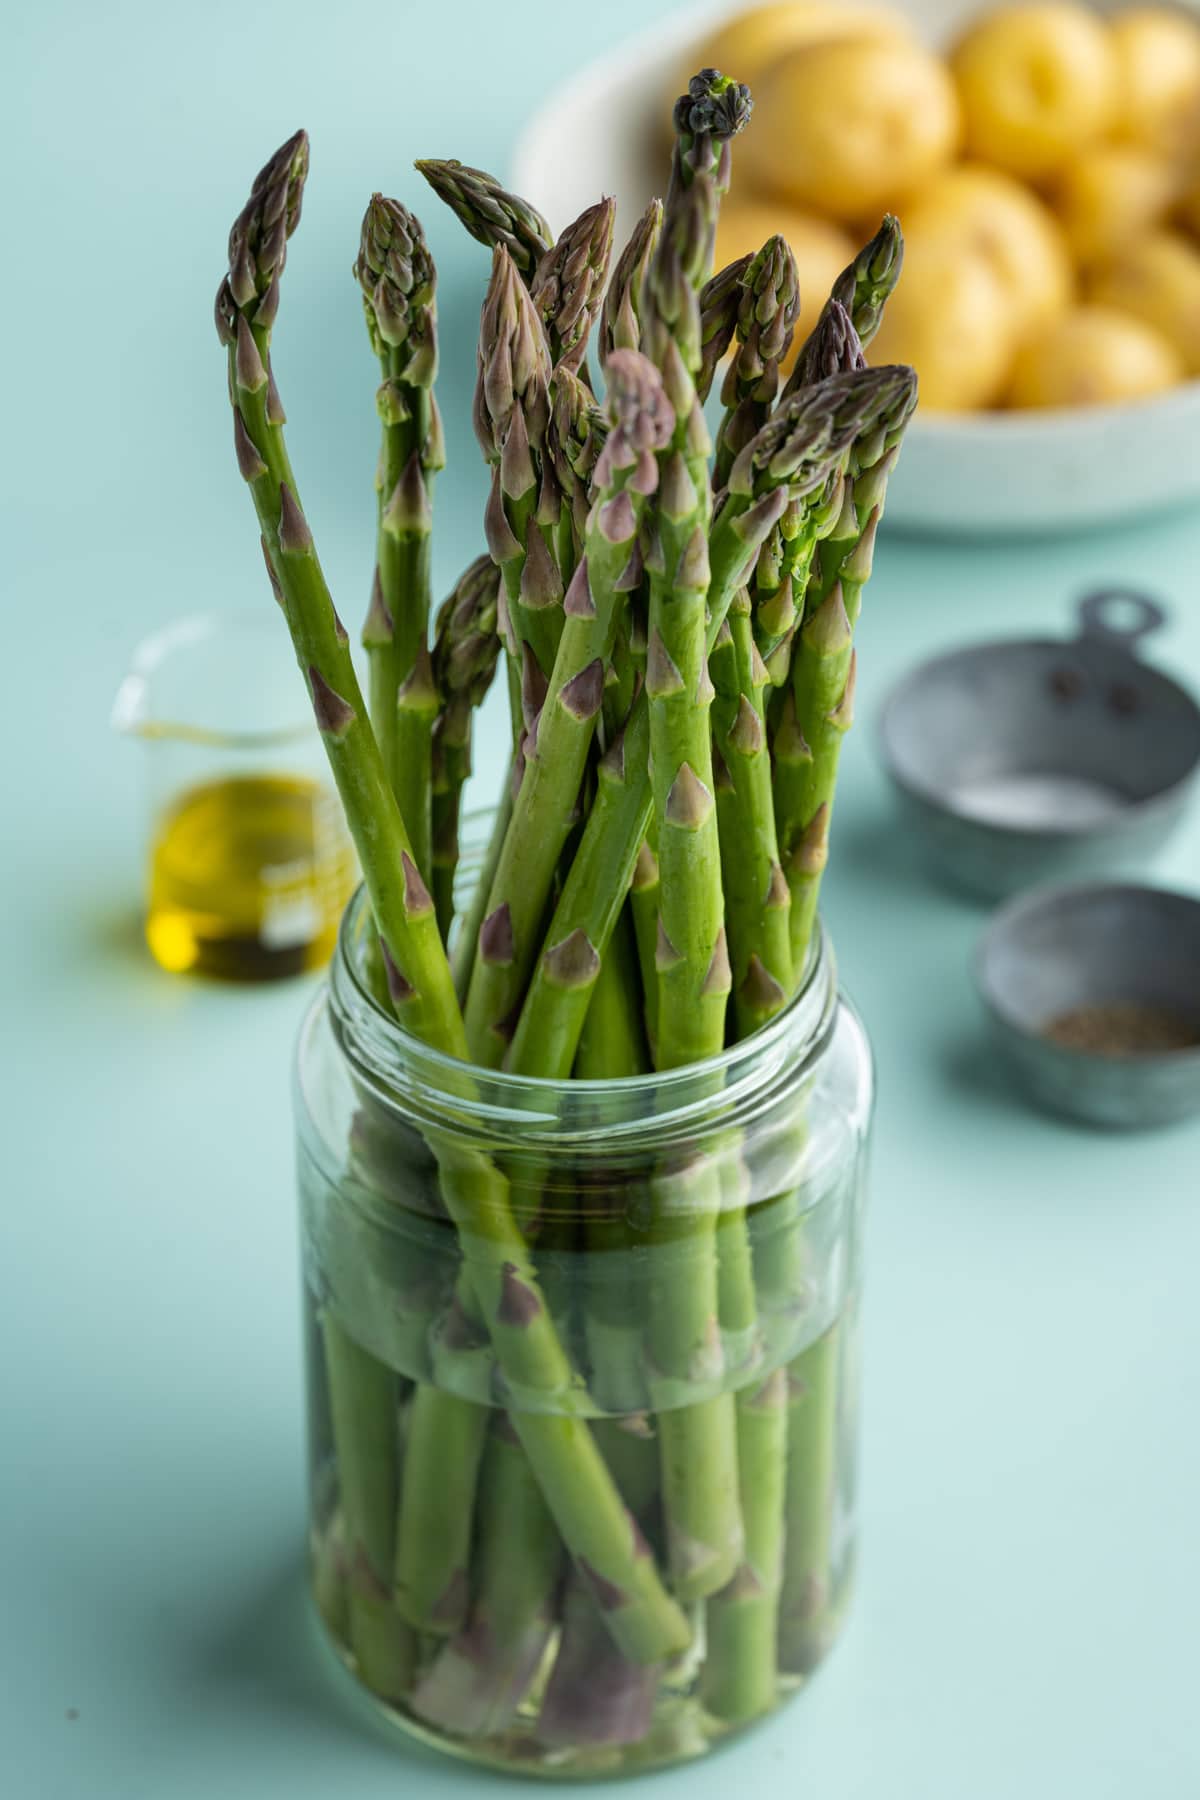 Storing asparagus before roasting with potatoes